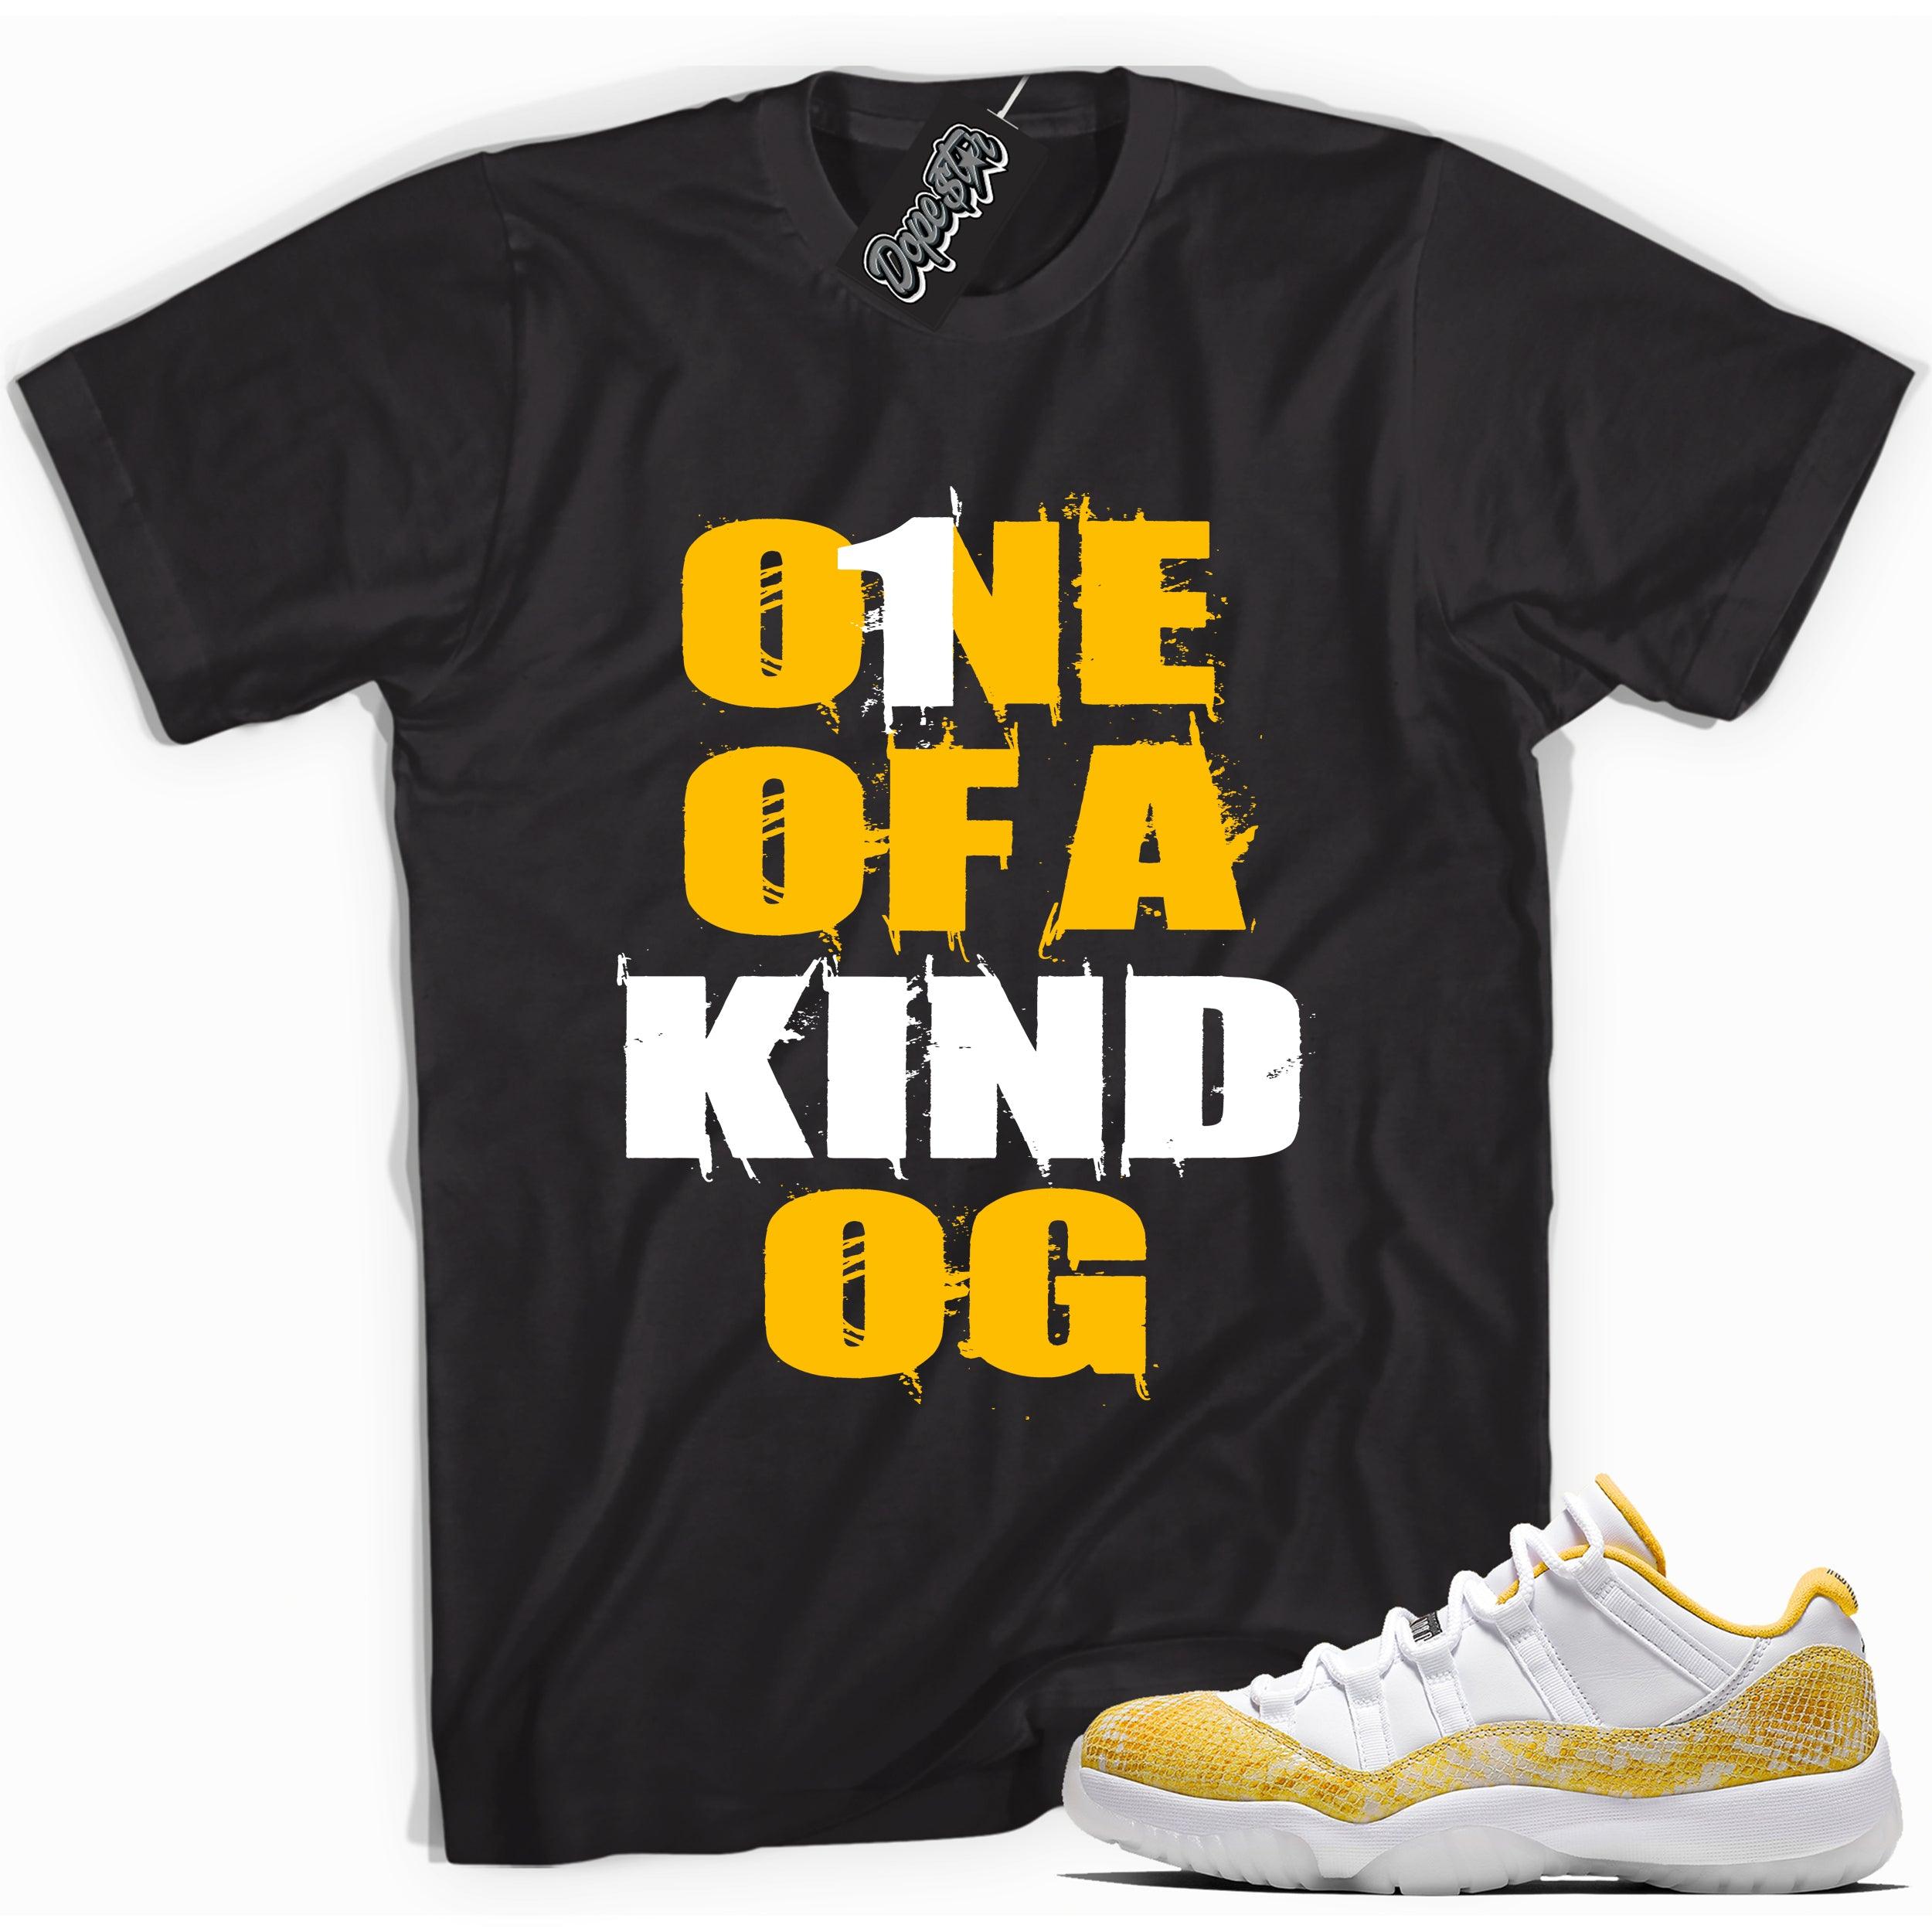 Cool black graphic tee with 'one of a kind' print, that perfectly matches  Air Jordan 11 Retro Low Yellow Snakeskin sneakers